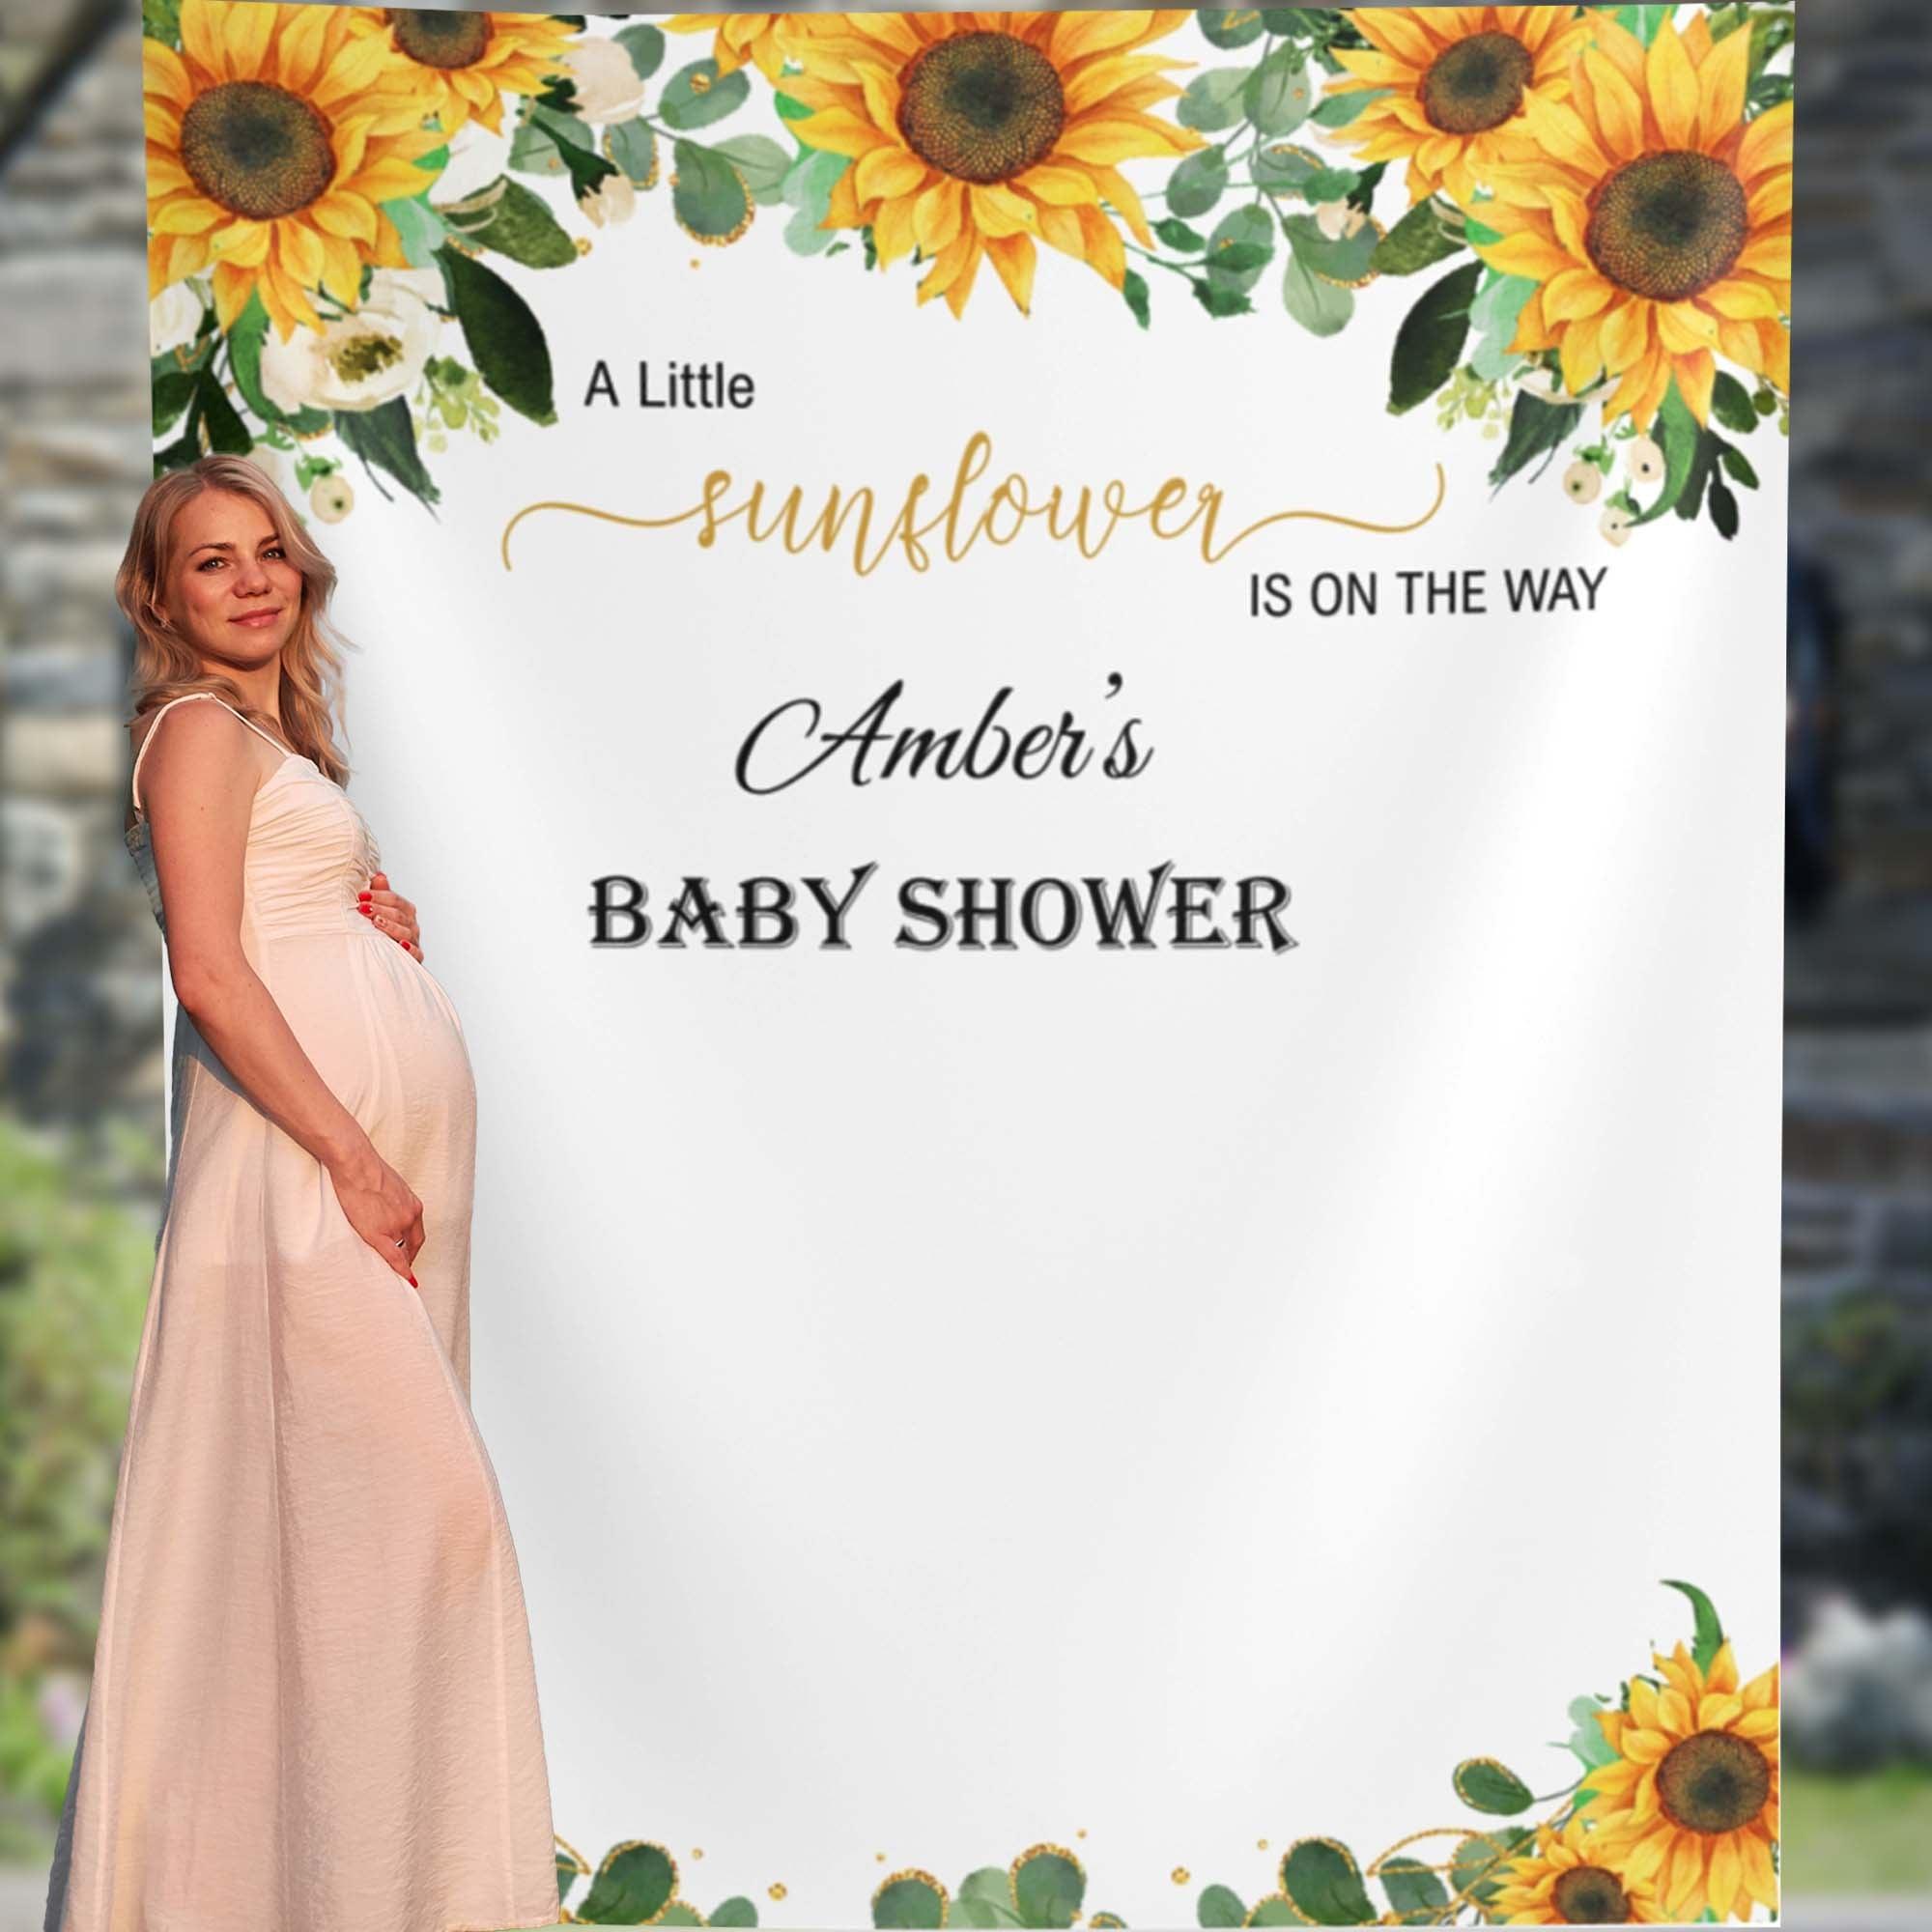 Sunflower Greenery Baby Shower Backdrop for A Sunflower Baby Shower Theme Party - iJay Backdrops